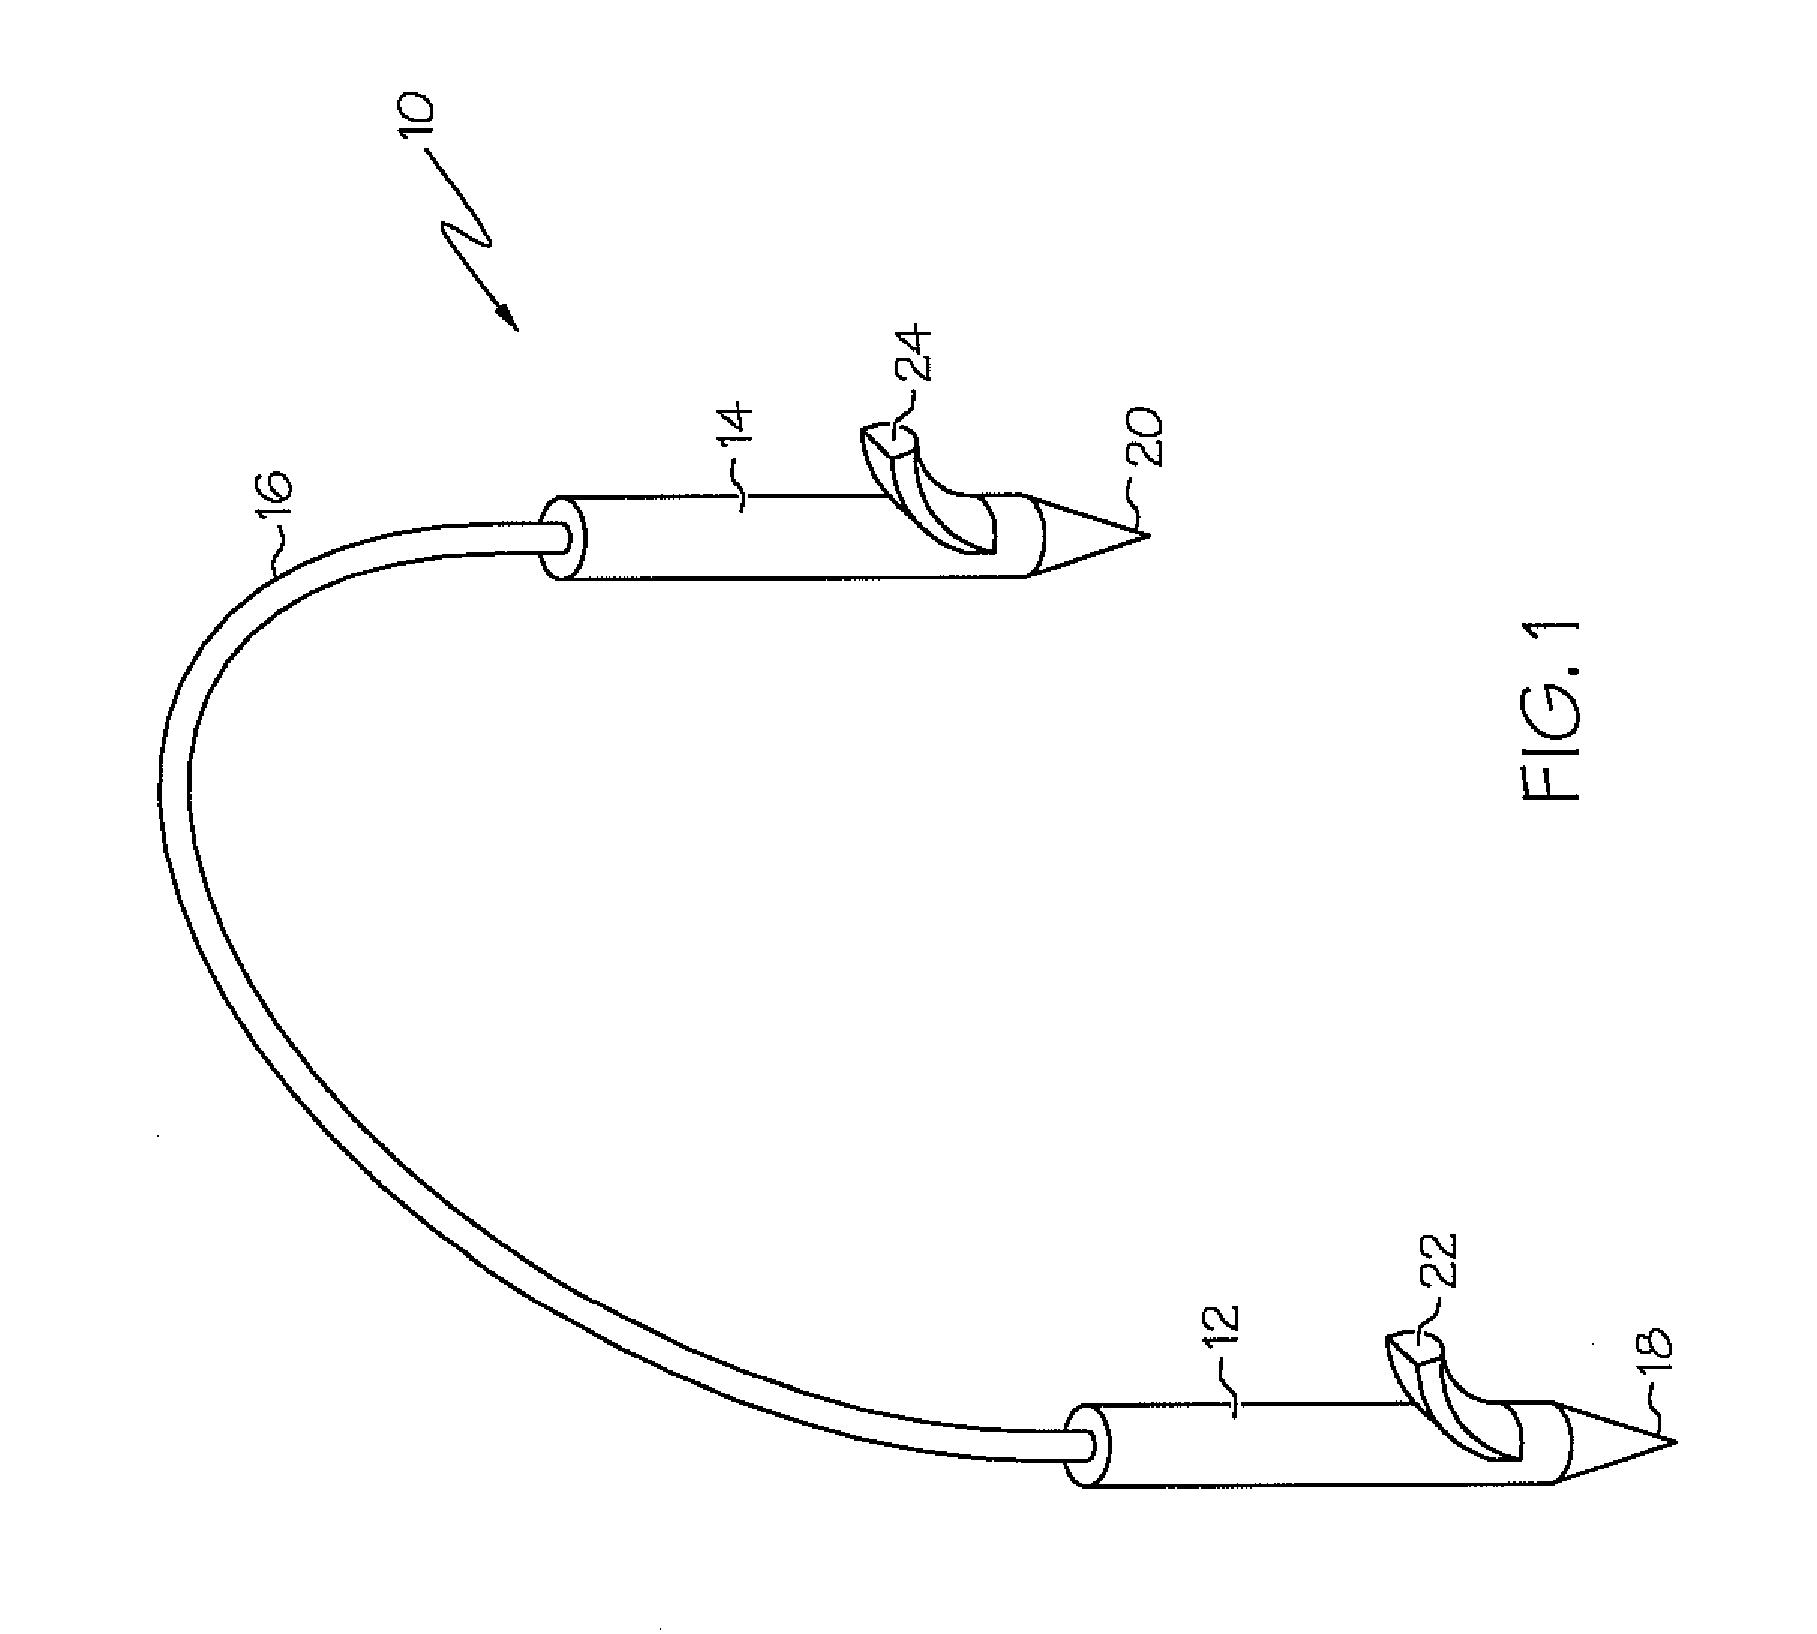 Suture anchoring system